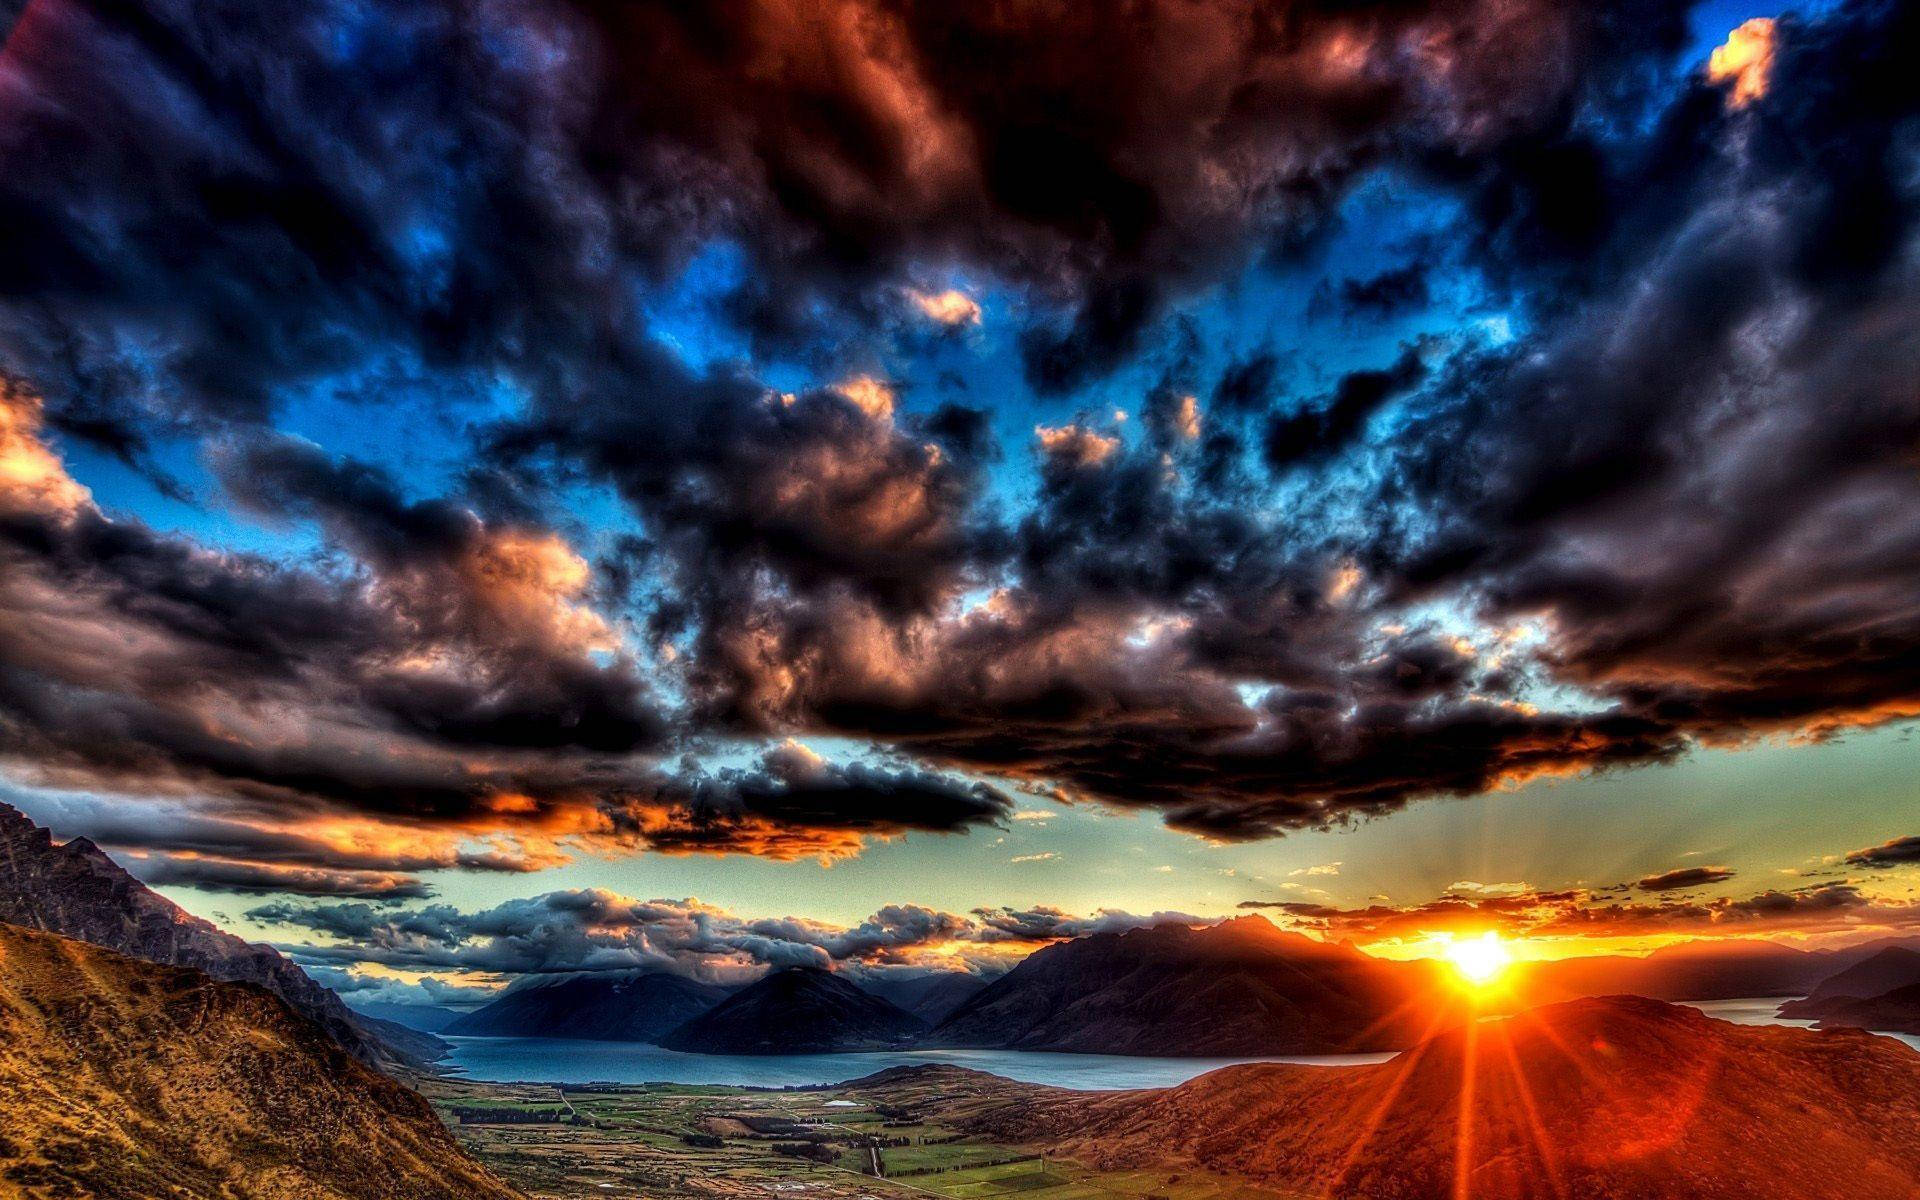 Free Sky Wallpaper Downloads, [1500+] Sky Wallpapers for FREE |  